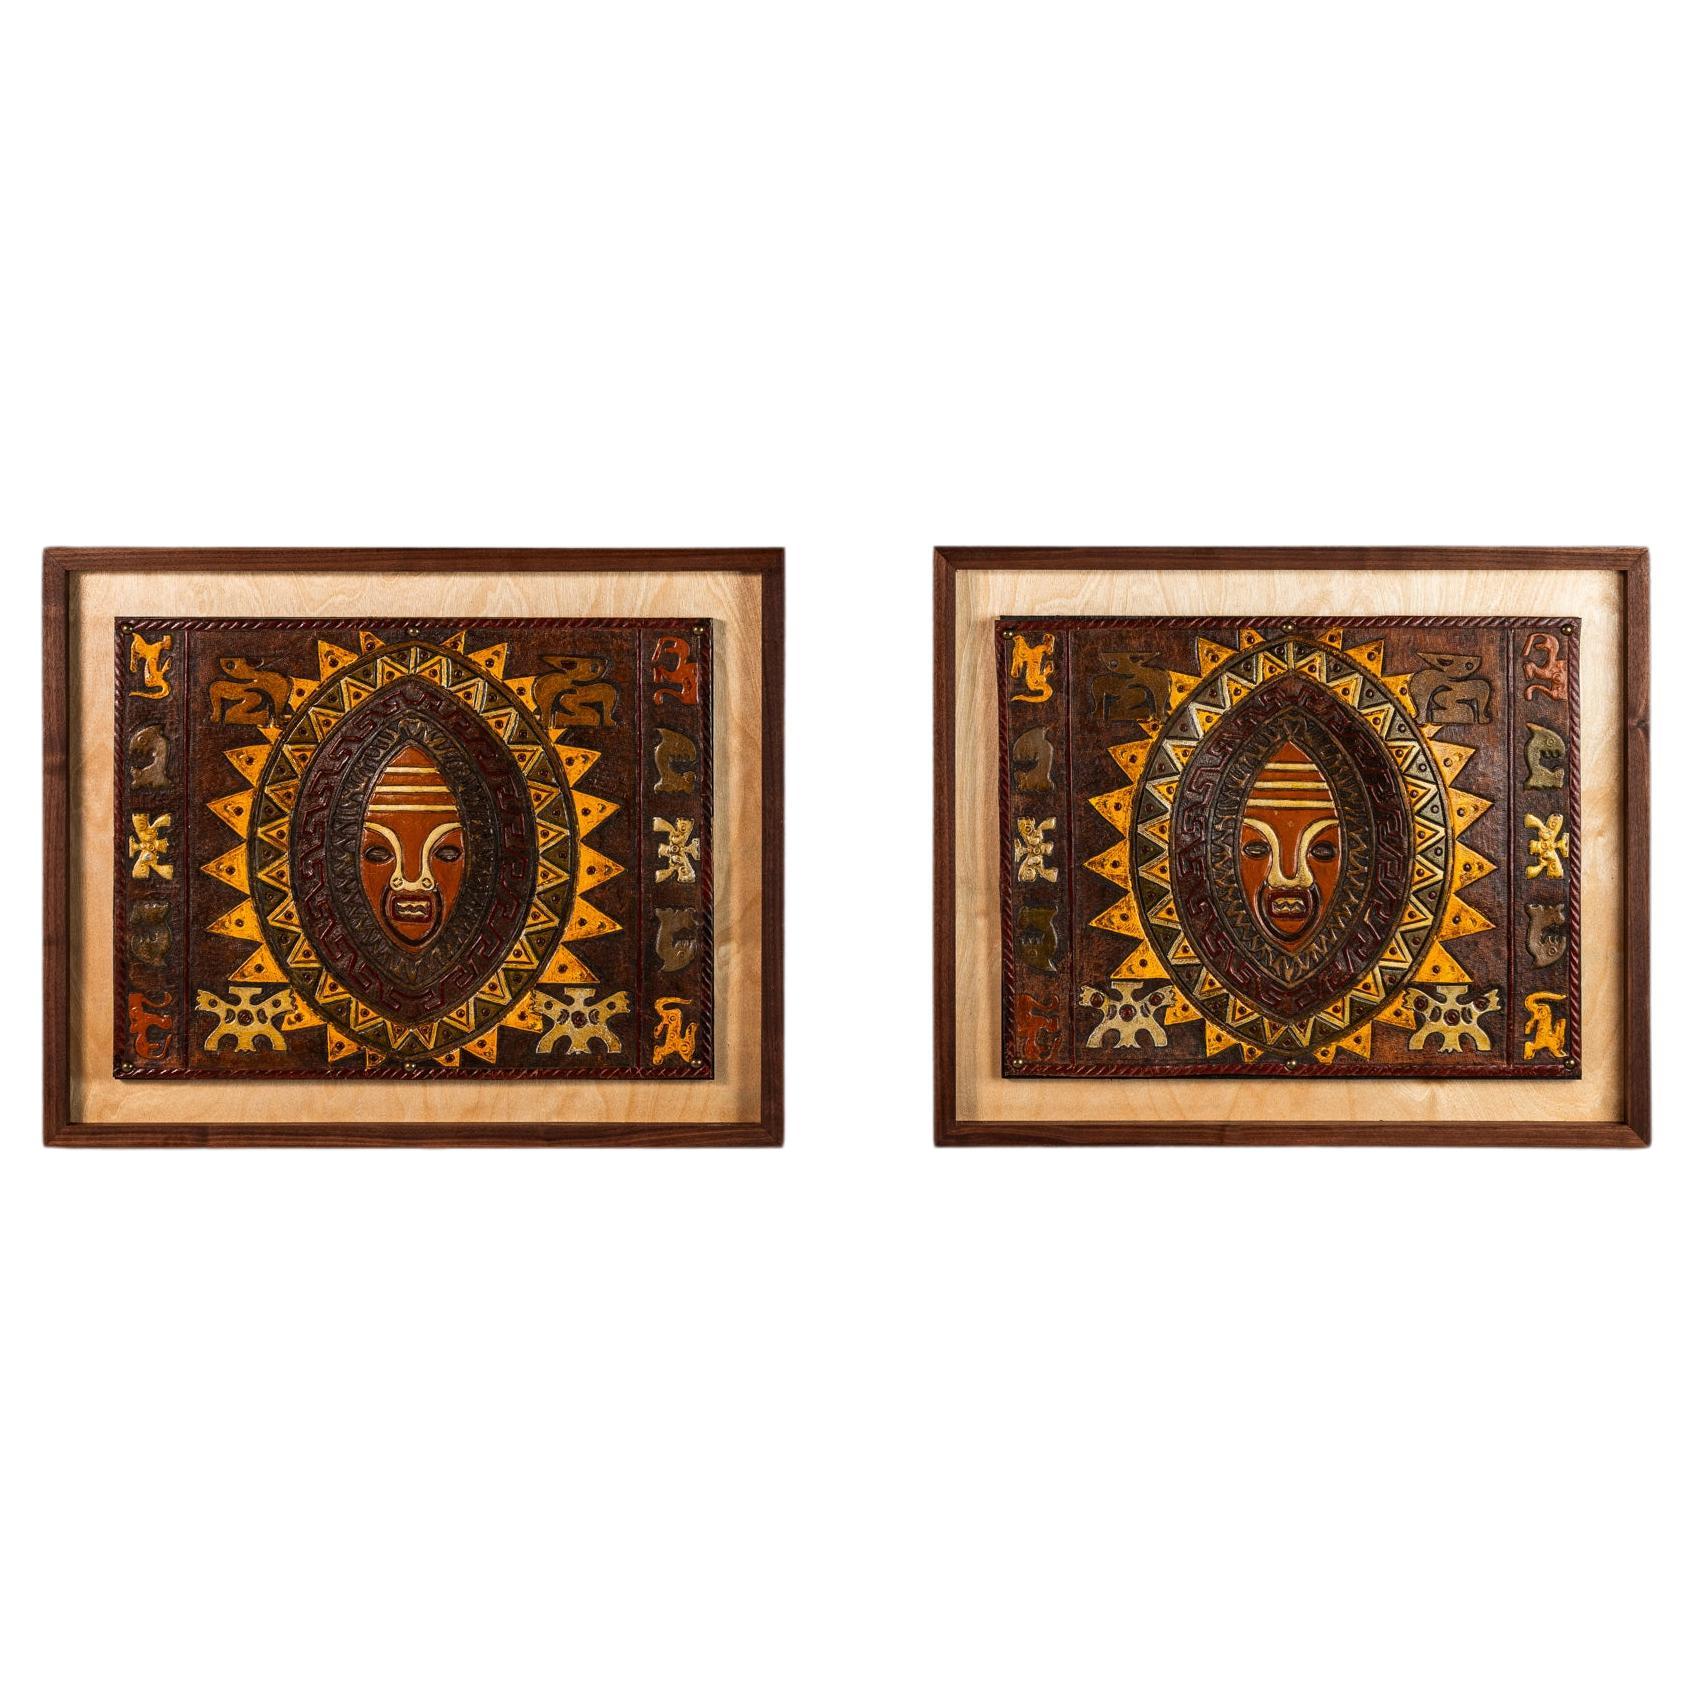 Set of 2 Framed Leather Pre-Columbian Art by Angel Pazmino, Ecuador, c. 1960s For Sale